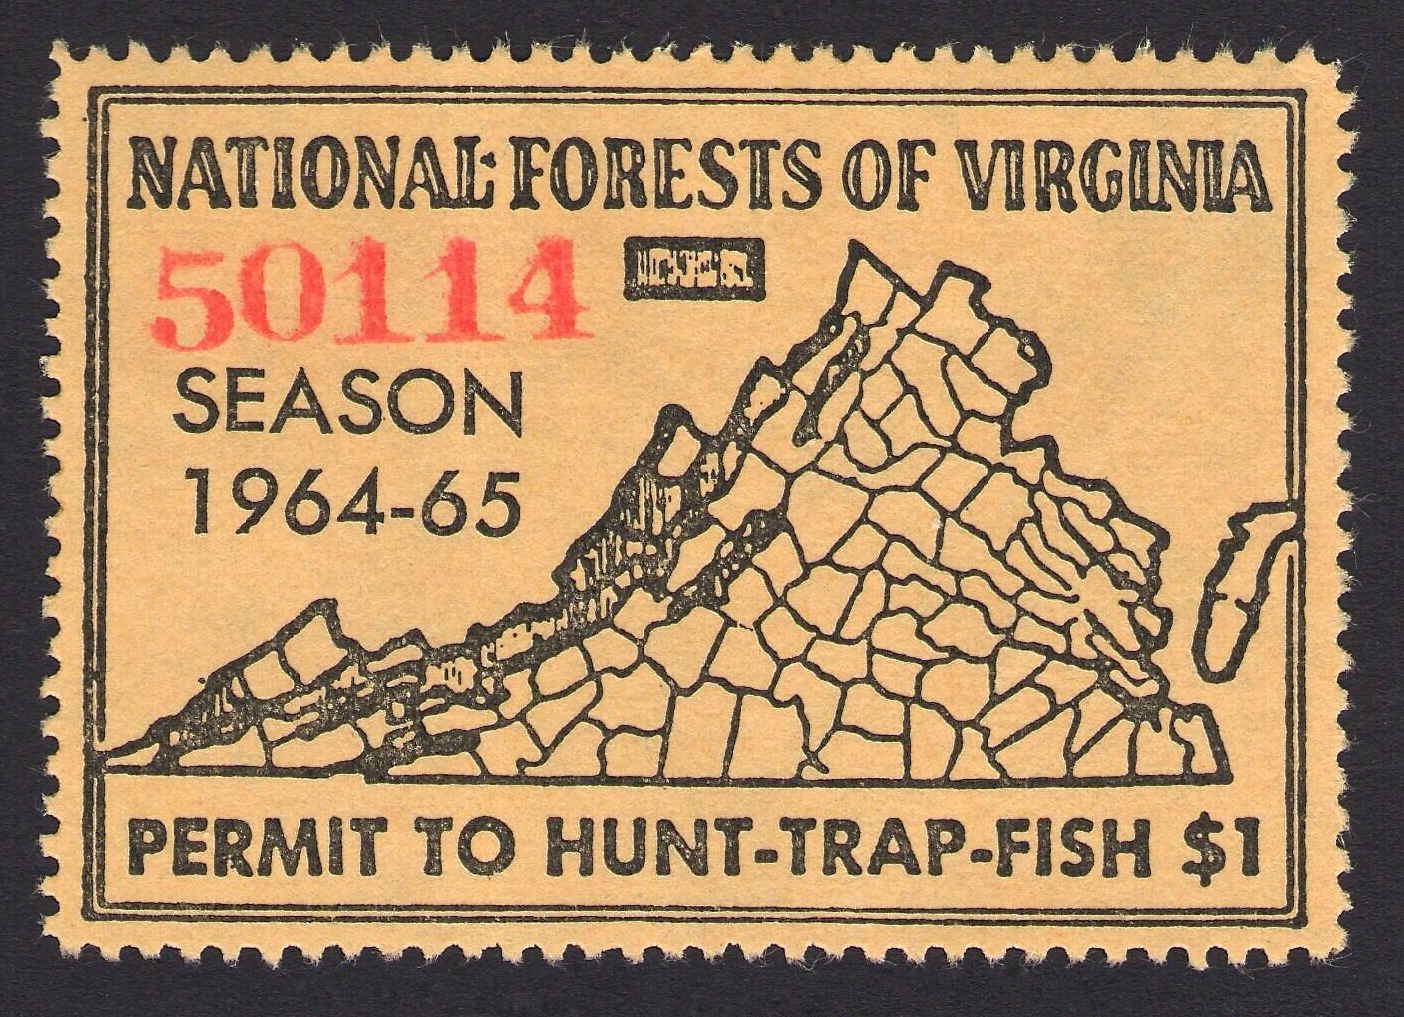 1964-65 National Forest Virginia